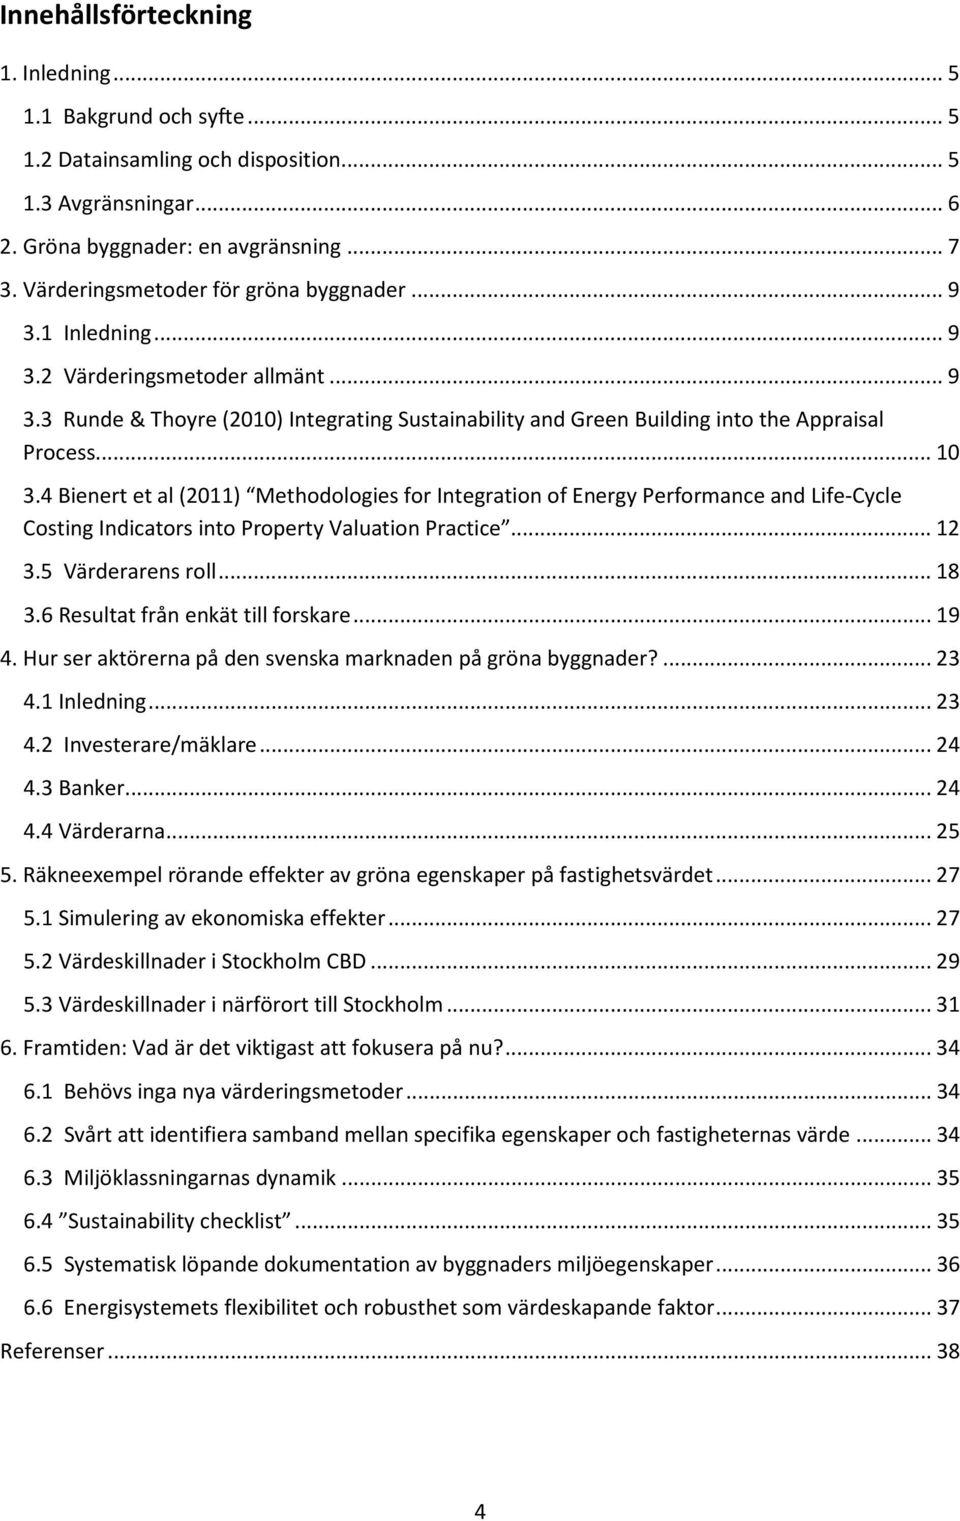 .. 10 3.4 Bienert et al (2011) Methodologies for Integration of Energy Performance and Life-Cycle Costing Indicators into Property Valuation Practice... 12 3.5 Värderarens roll... 18 3.